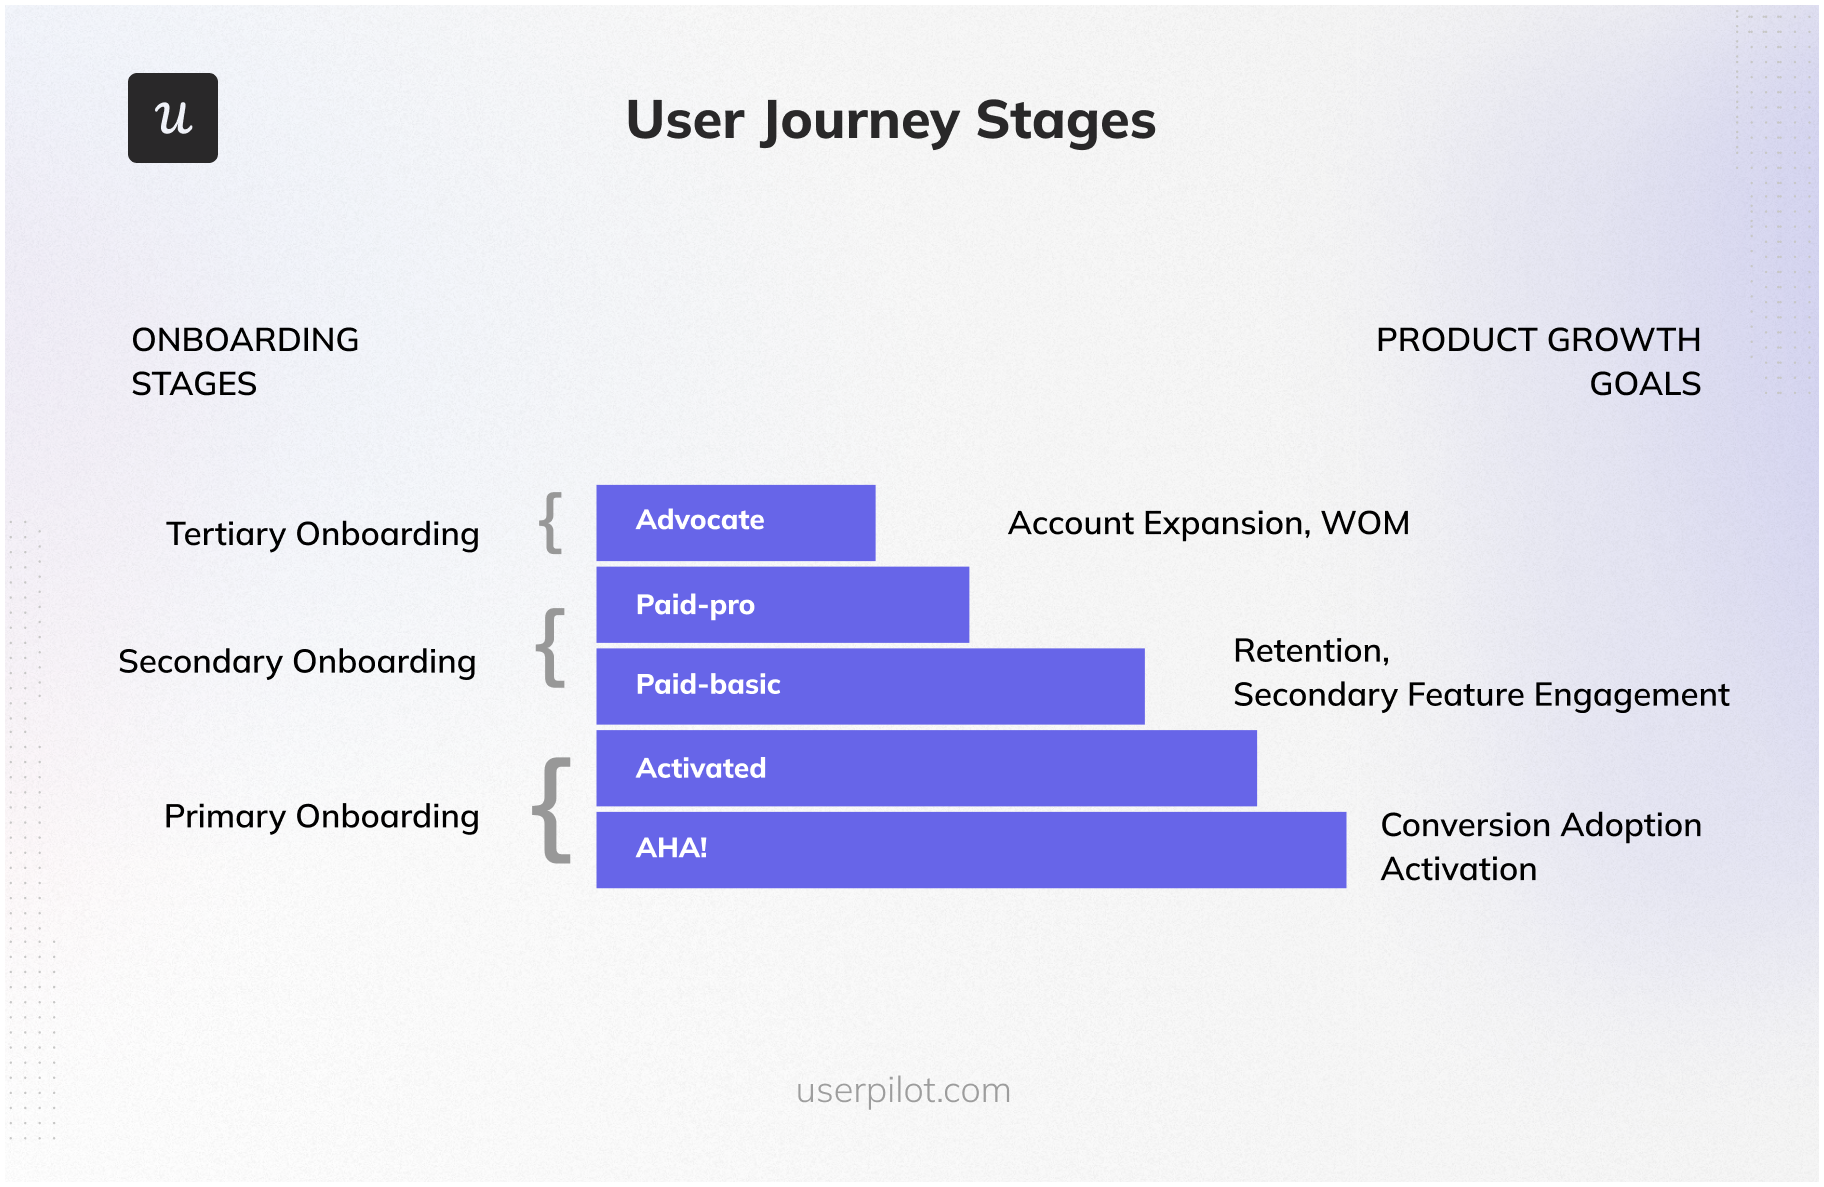 User journey stages